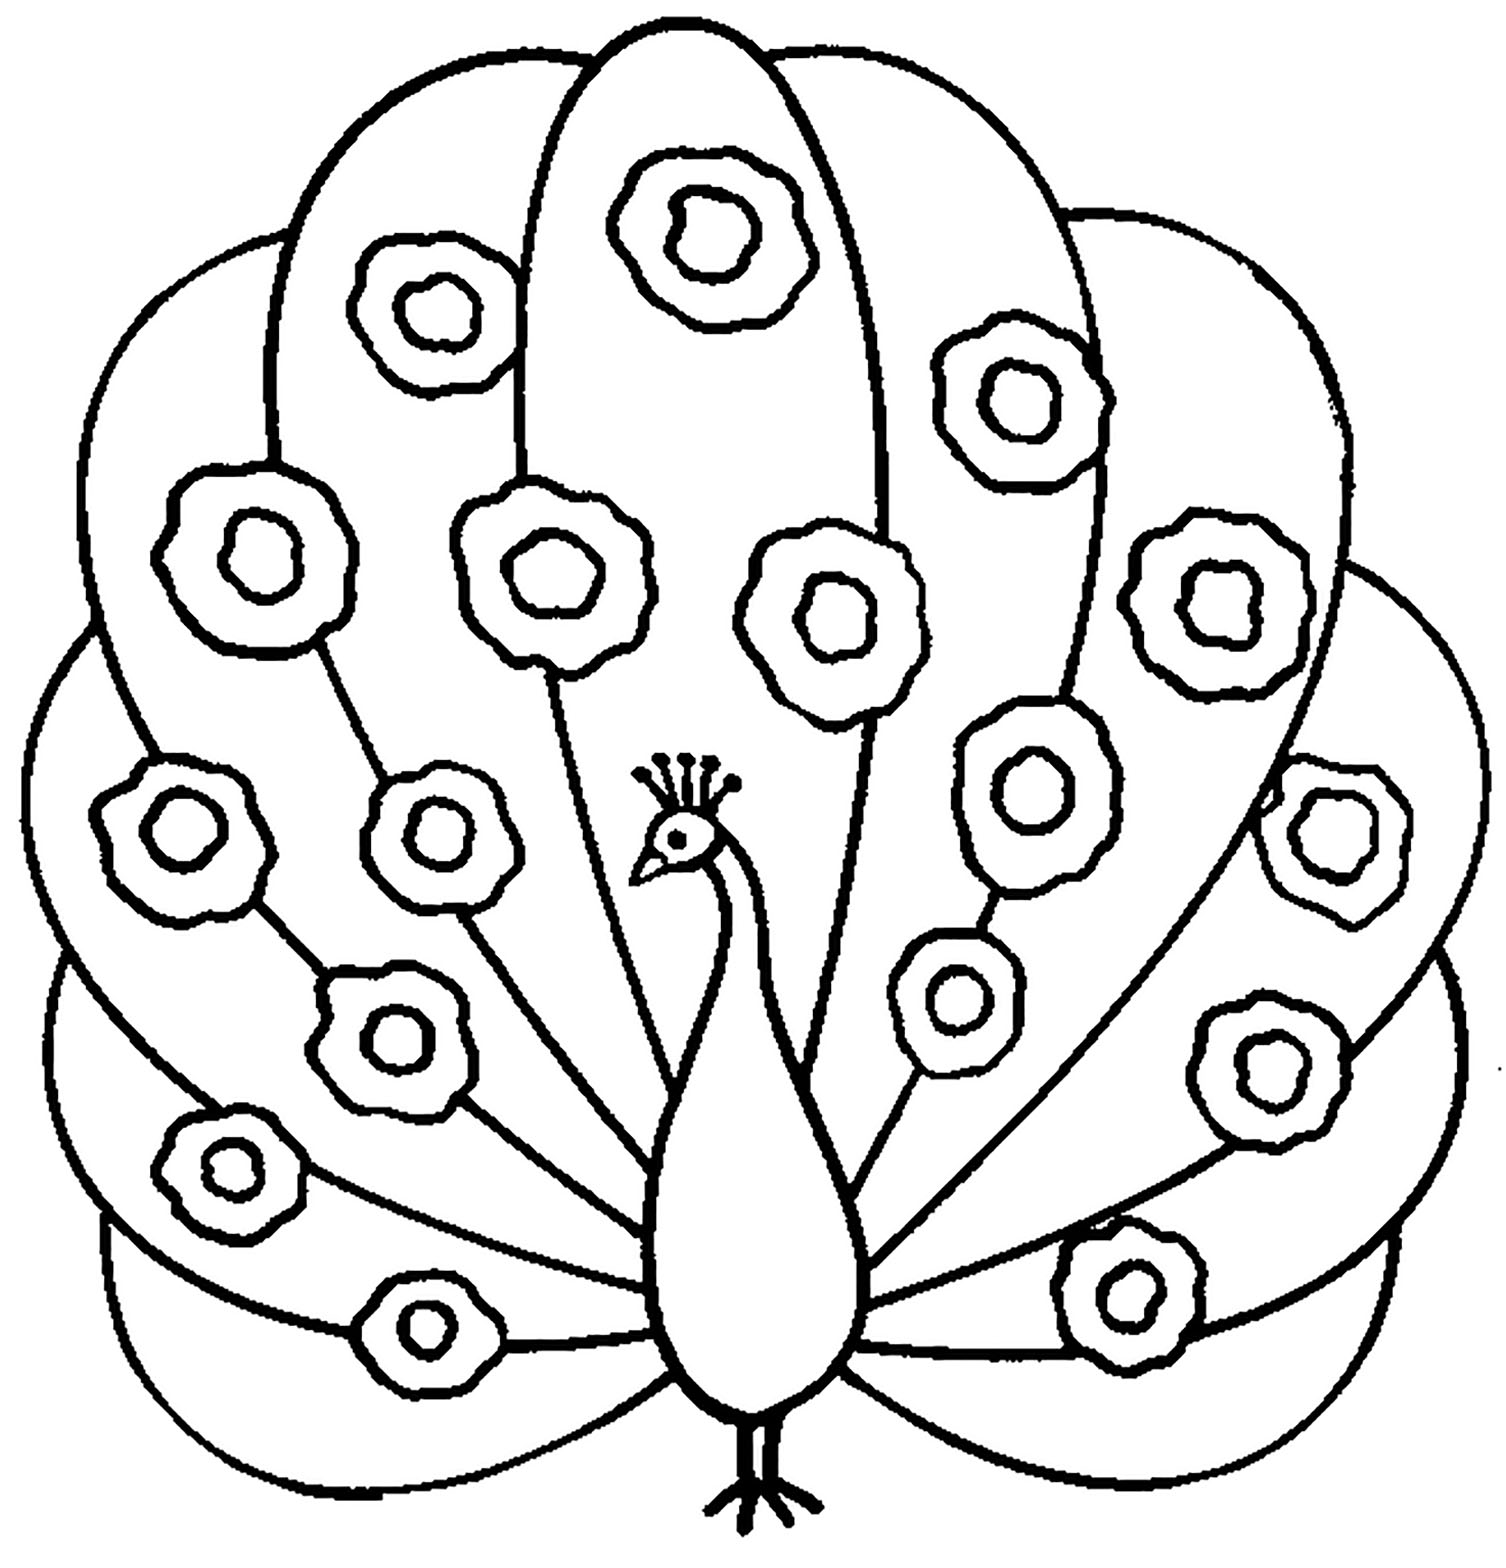 Fun peacock coloring pages to print and color